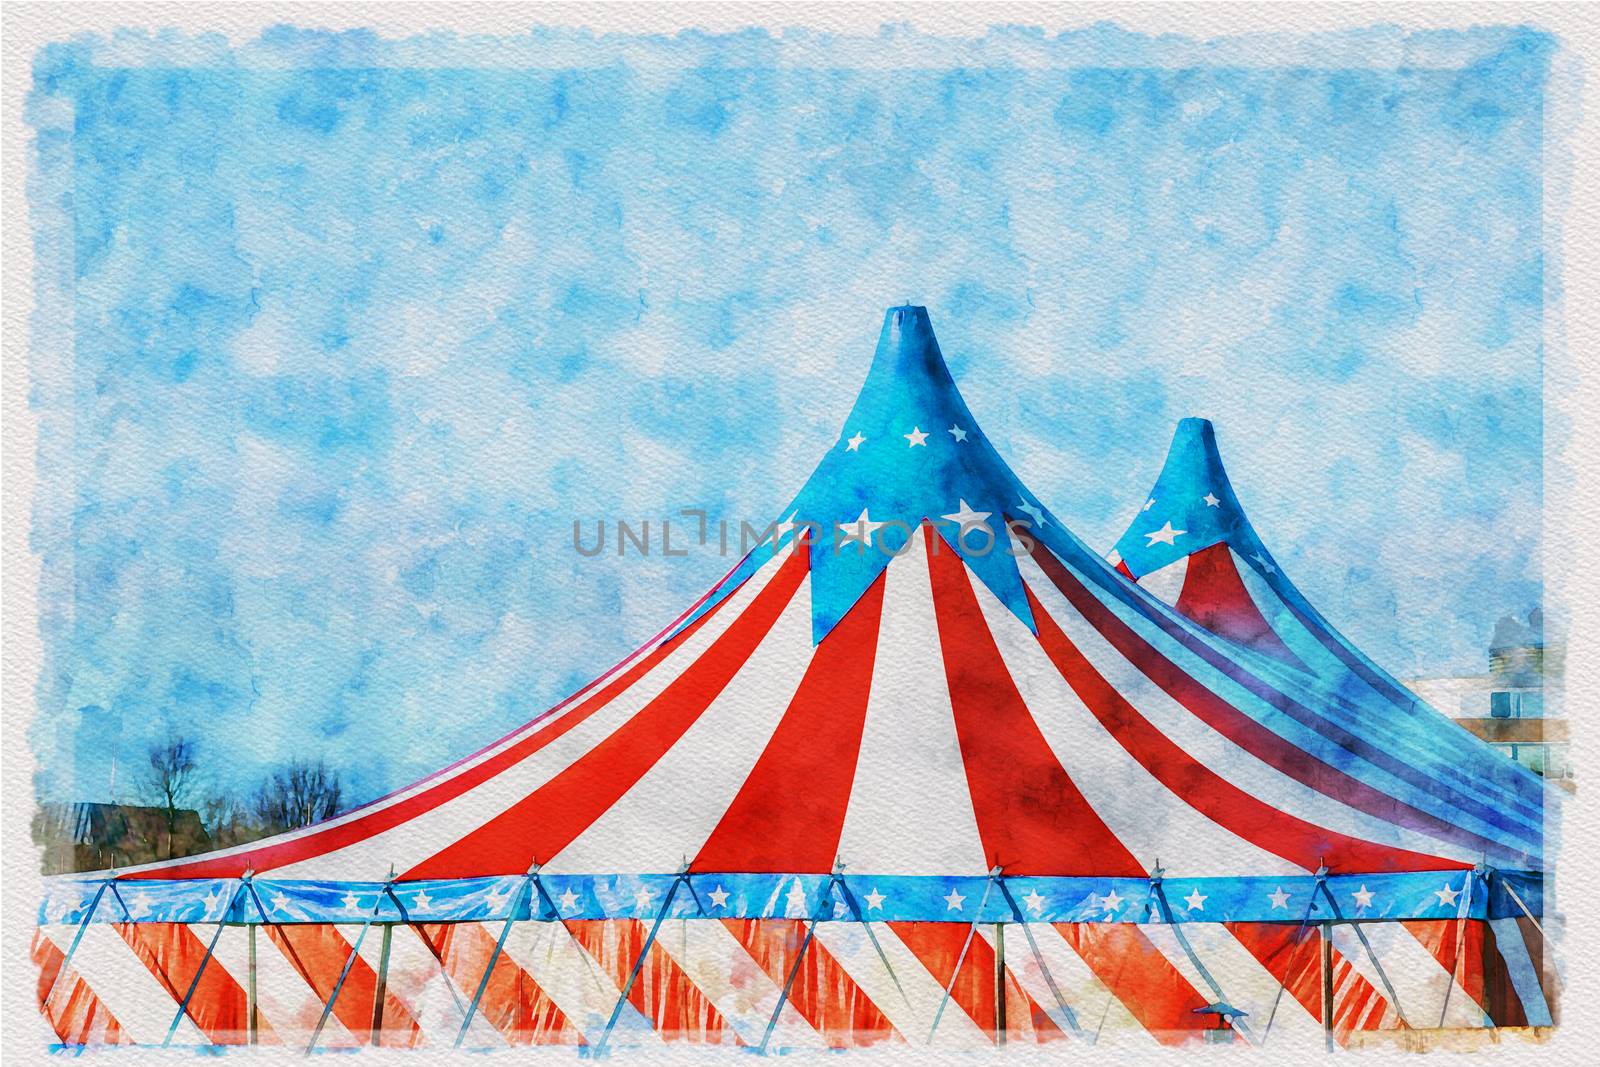 Digital watercolor painting red and white circus tent topped with bleu starred cover against a sunny blue sky with clouds by ankorlight